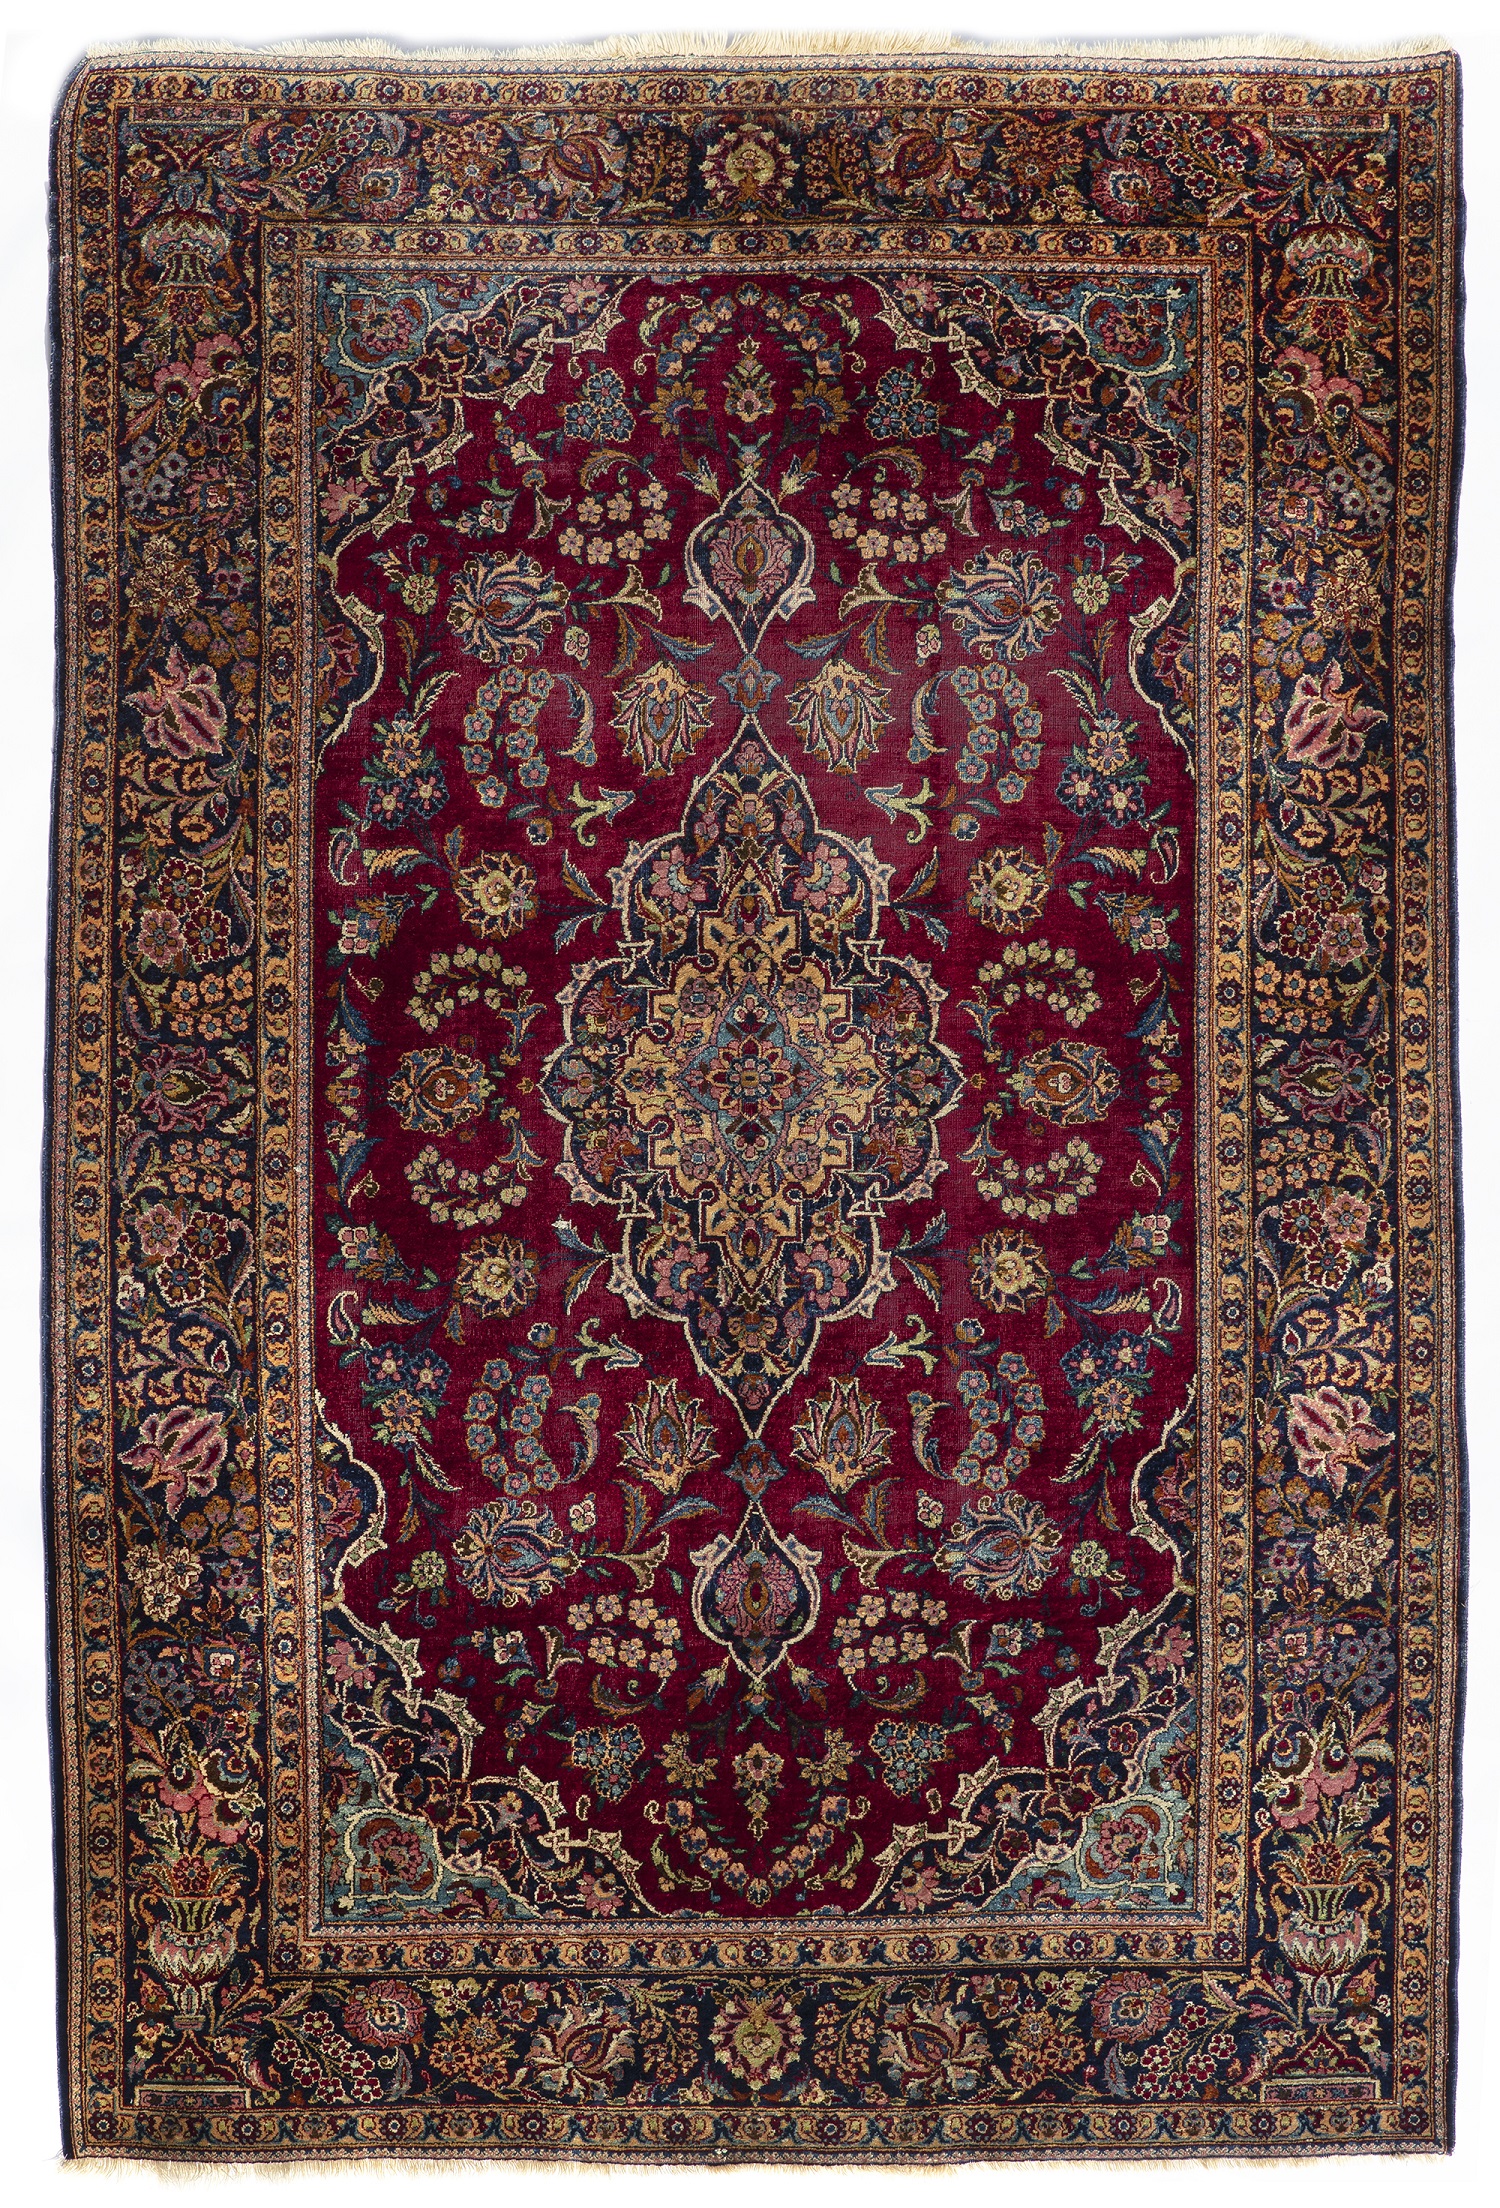 A PERSIAN KASHAN CARPET, EARLY 20TH CENTURY